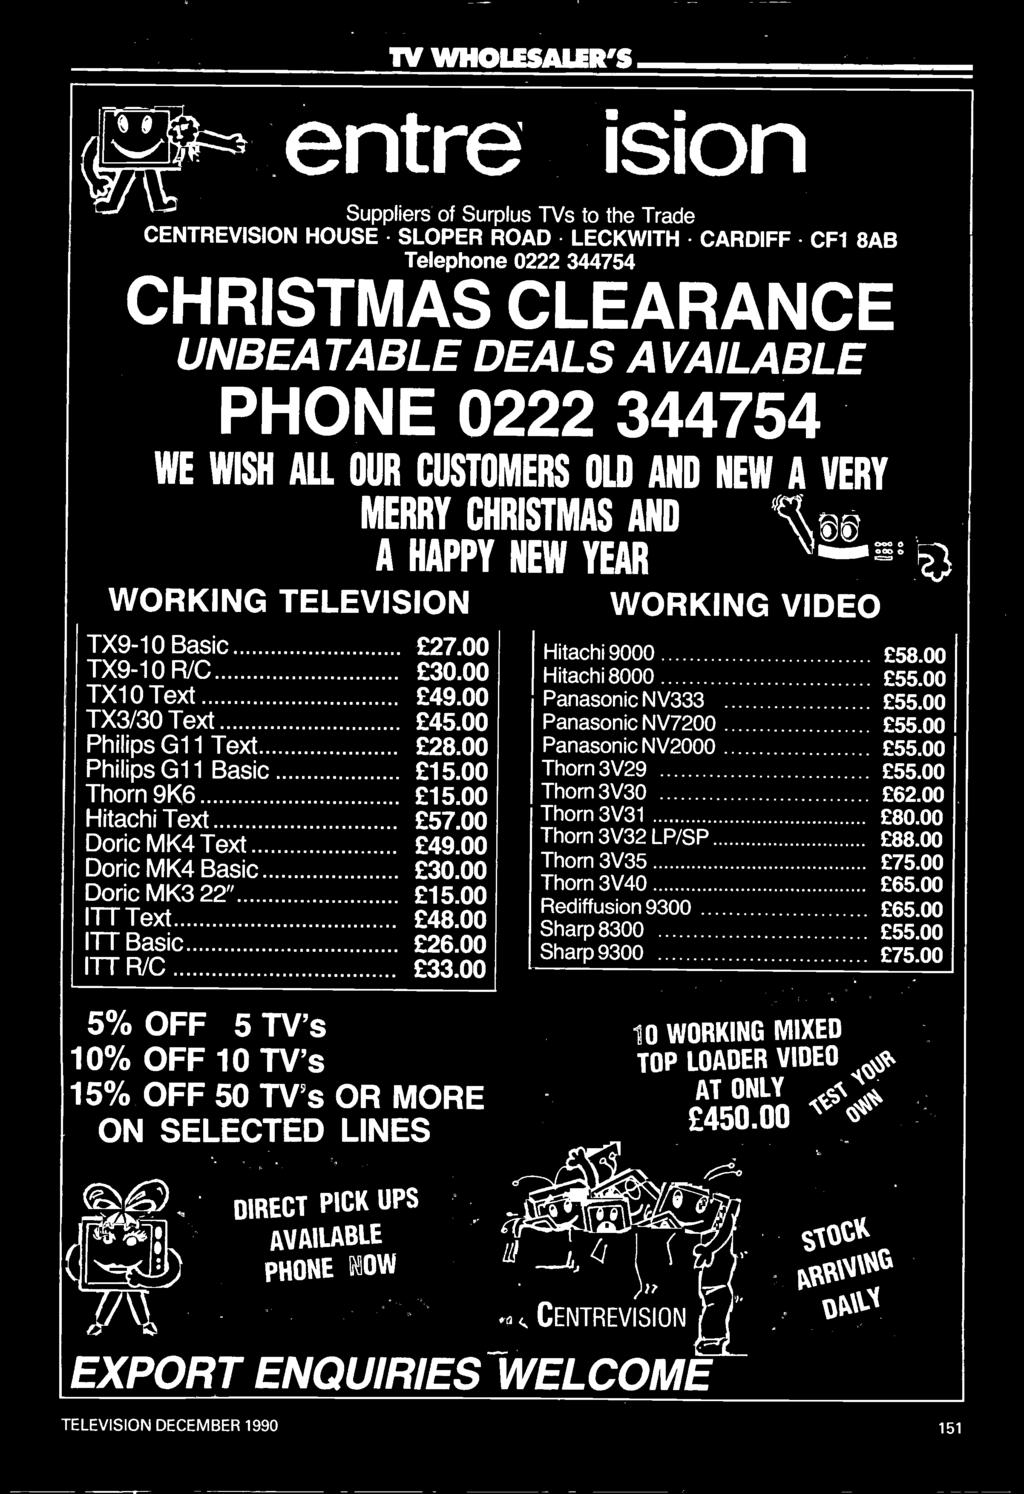 00 5% OFF 5 TV's 10% OFF 10 TV's 15% OFF 50 TV's OR MORE ON SELECTED LINES MERRY CHRISTMAS AND A HAPPY NEW YEAR WORKING VIDEO Hitachi 9000 58.00 Hitachi 8000 55.